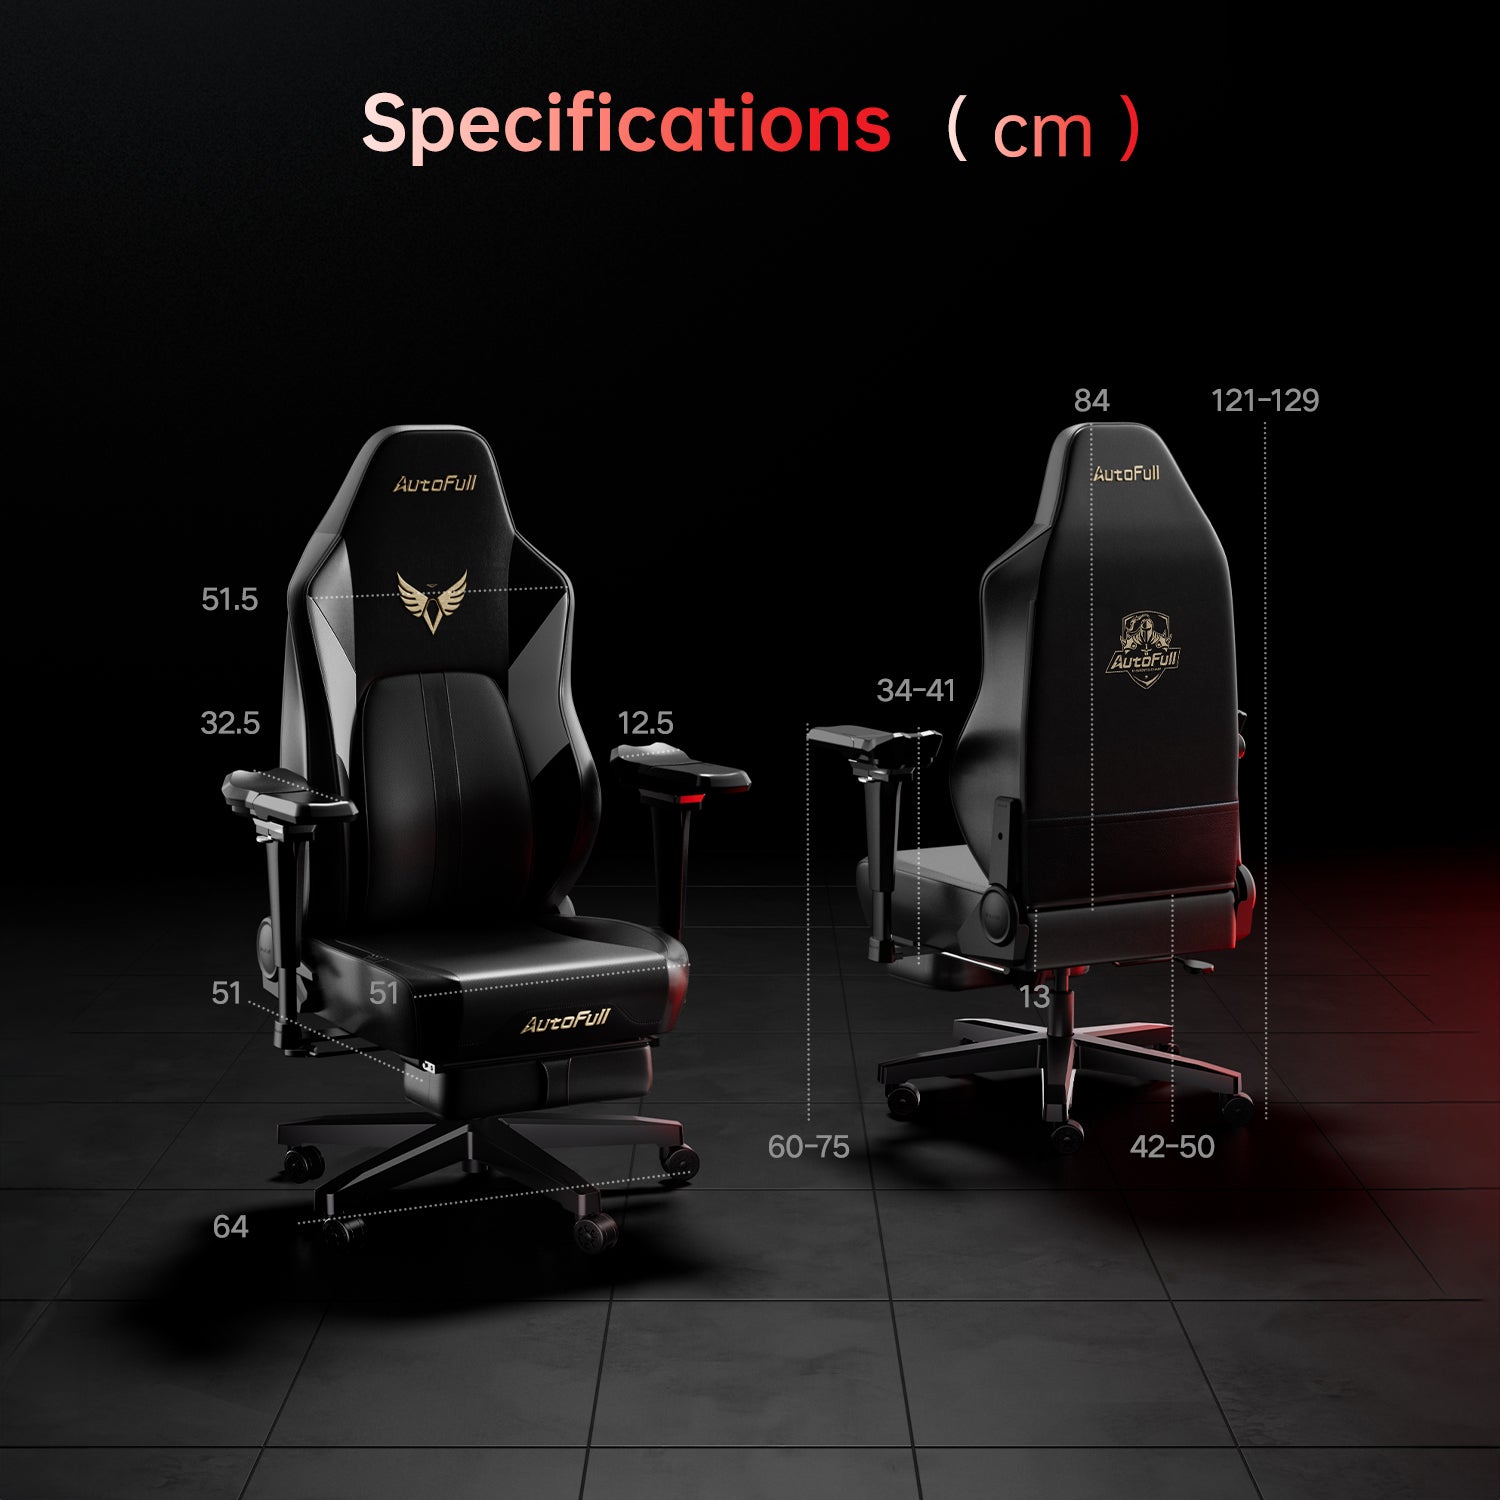 AutoFull M6 Gaming Chair, Standard, Dynamic Tracking Lumbar Support, without Footrest